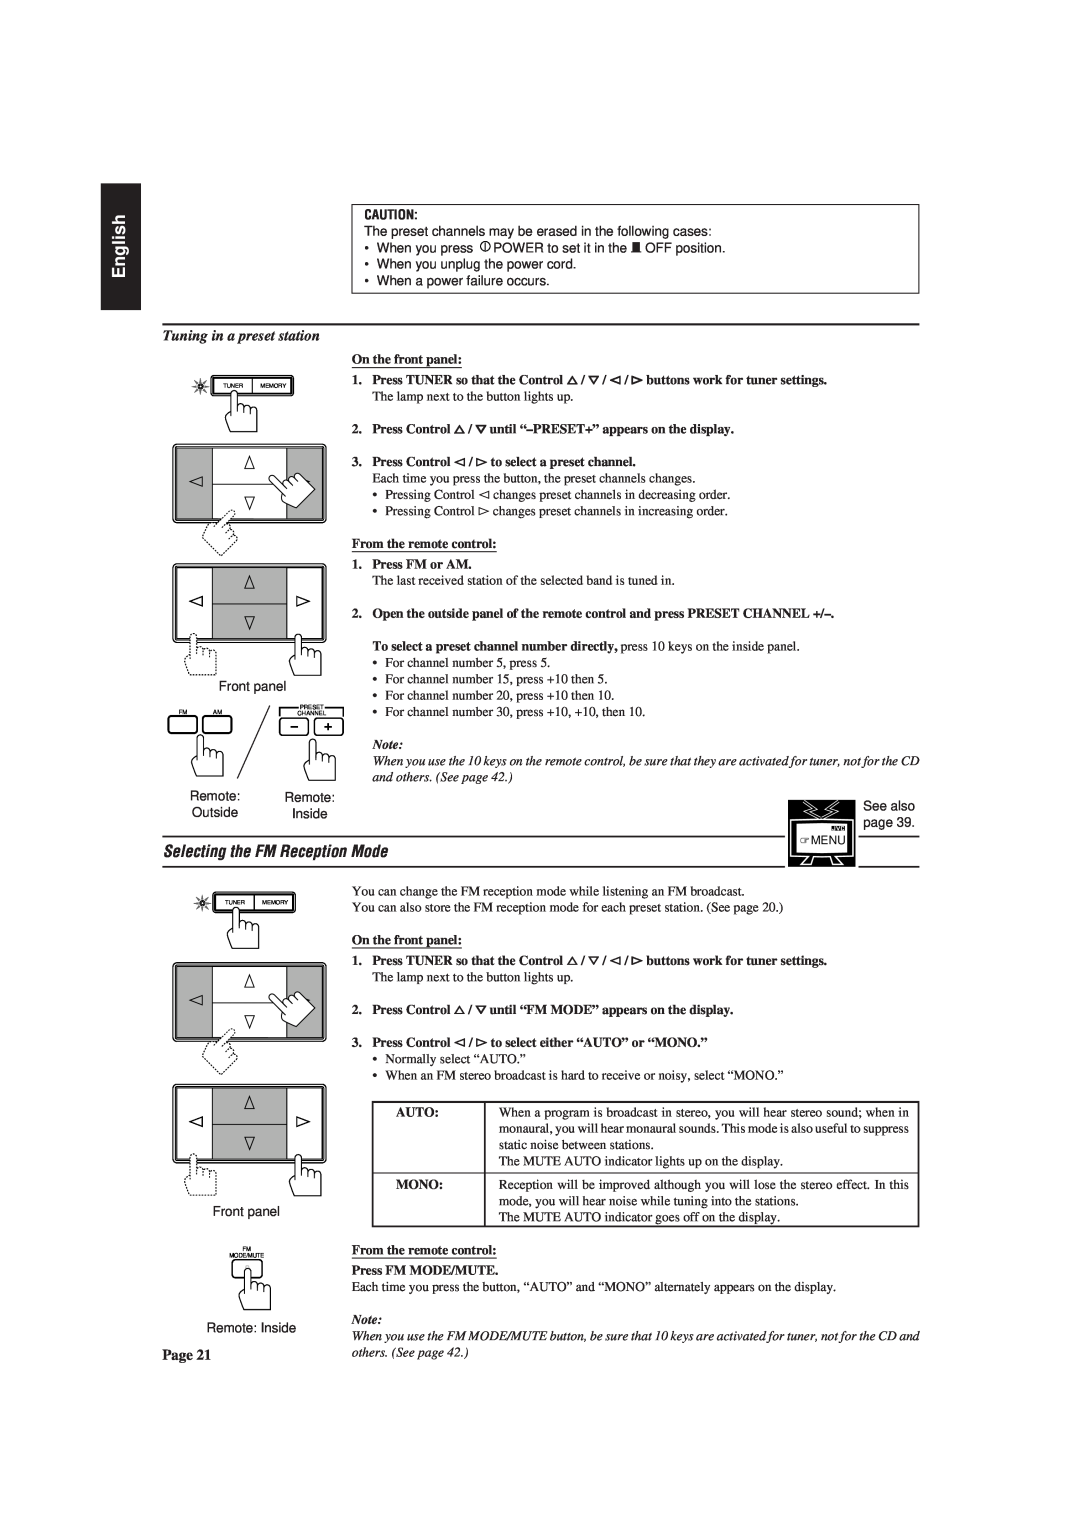 JVC RX-730RBK manual Selecting the FM Reception Mode, Tuning in a preset station, English 